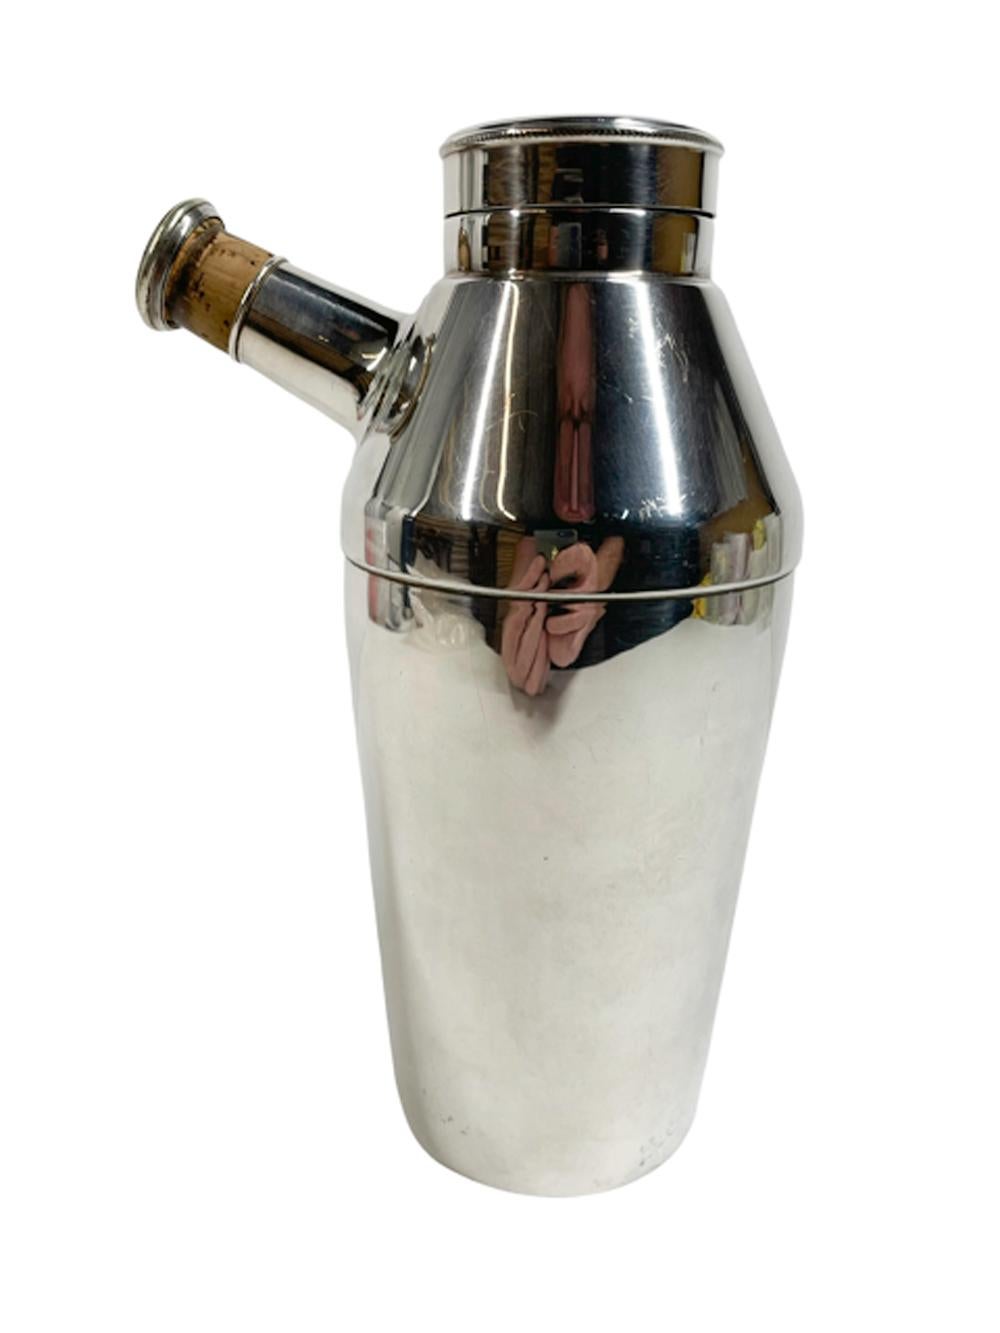 Art Deco silver plate cocktail shaker by Elkington & Co. with a tapered body and conical top with disk form cover and angled pour spout with silver plate capped cork stopper.